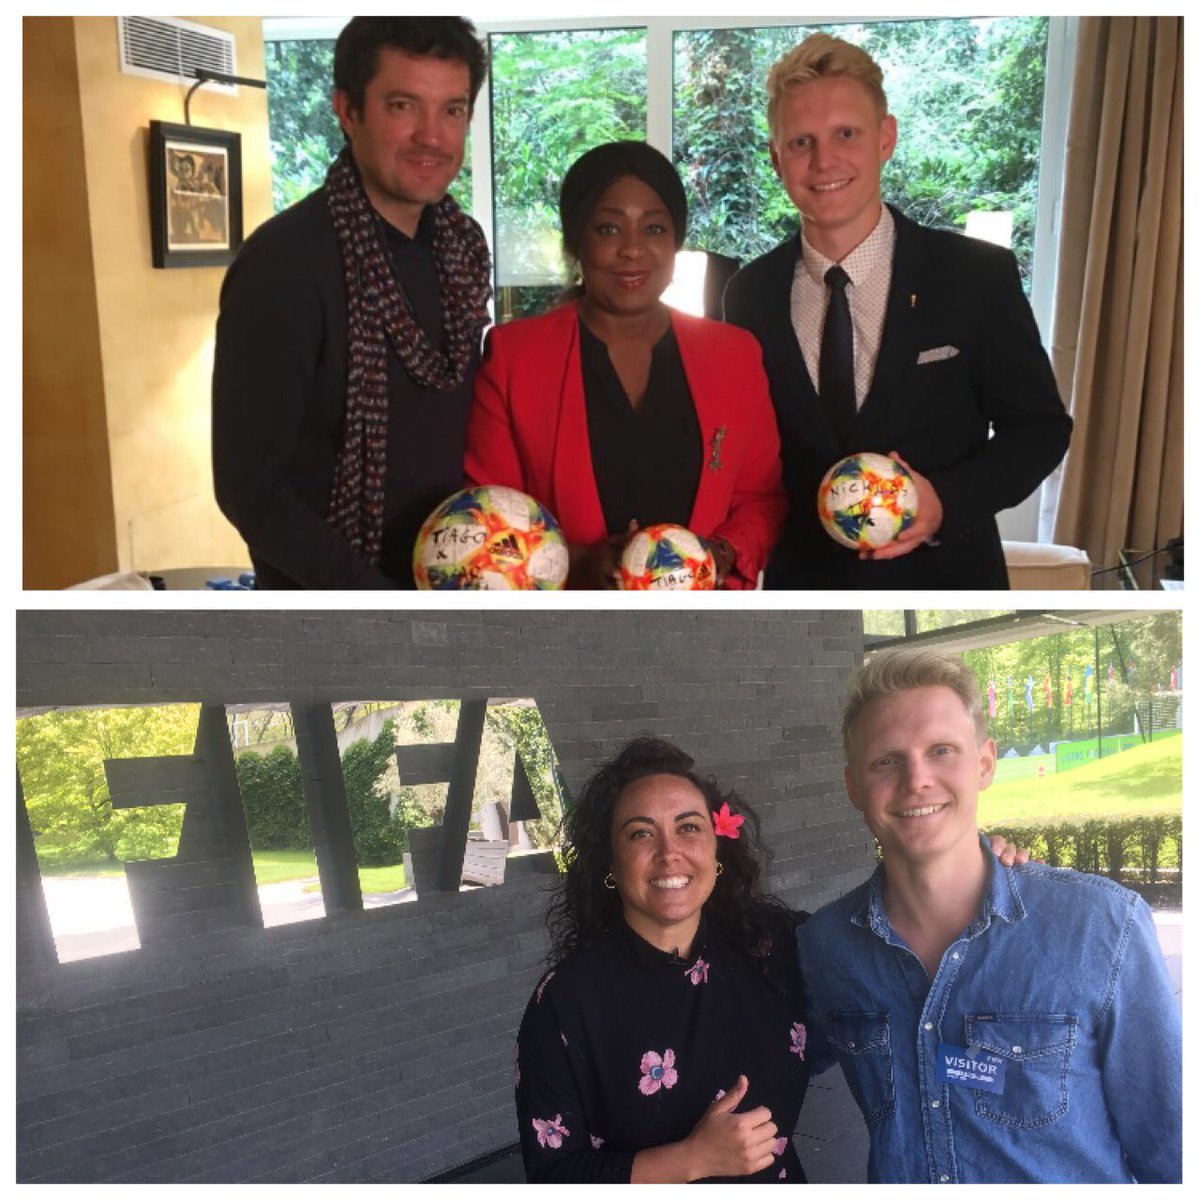 Podcast out now! “Women’s football a big untapped market!” #FWWC will mark a new era for the women’s game. Met FIFA’s first female Secretary General @fatma_samoura in Paris and went to Zurich to meet @SarBareman at the #FIFA HQ. #WomenInSport #WomenInFootball #dksport #dkmedier